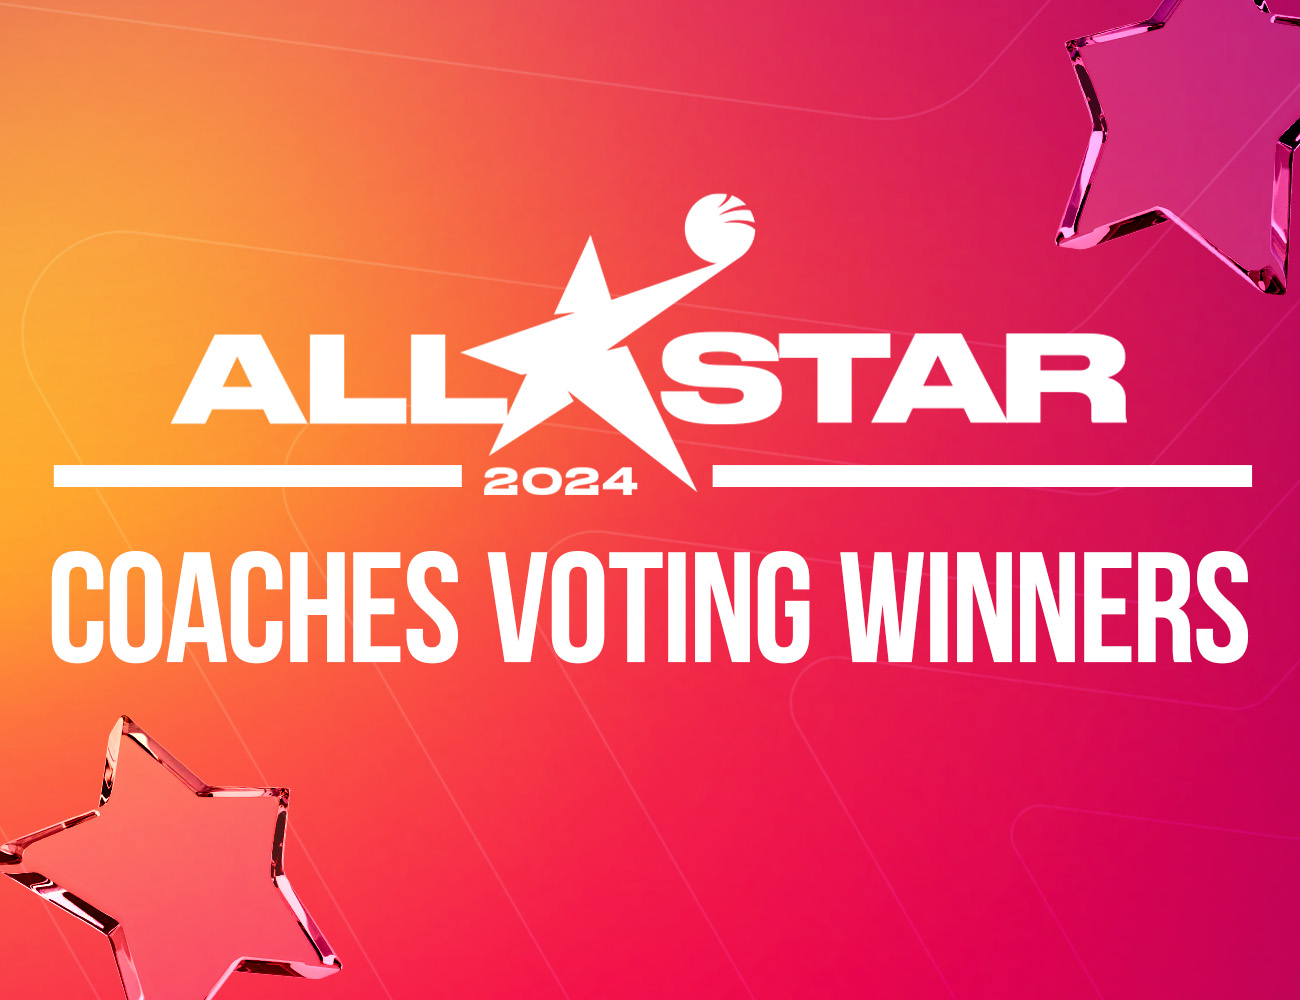 The third stage of the All-Star Game 2024 voting is over. The coaches have made their choice!